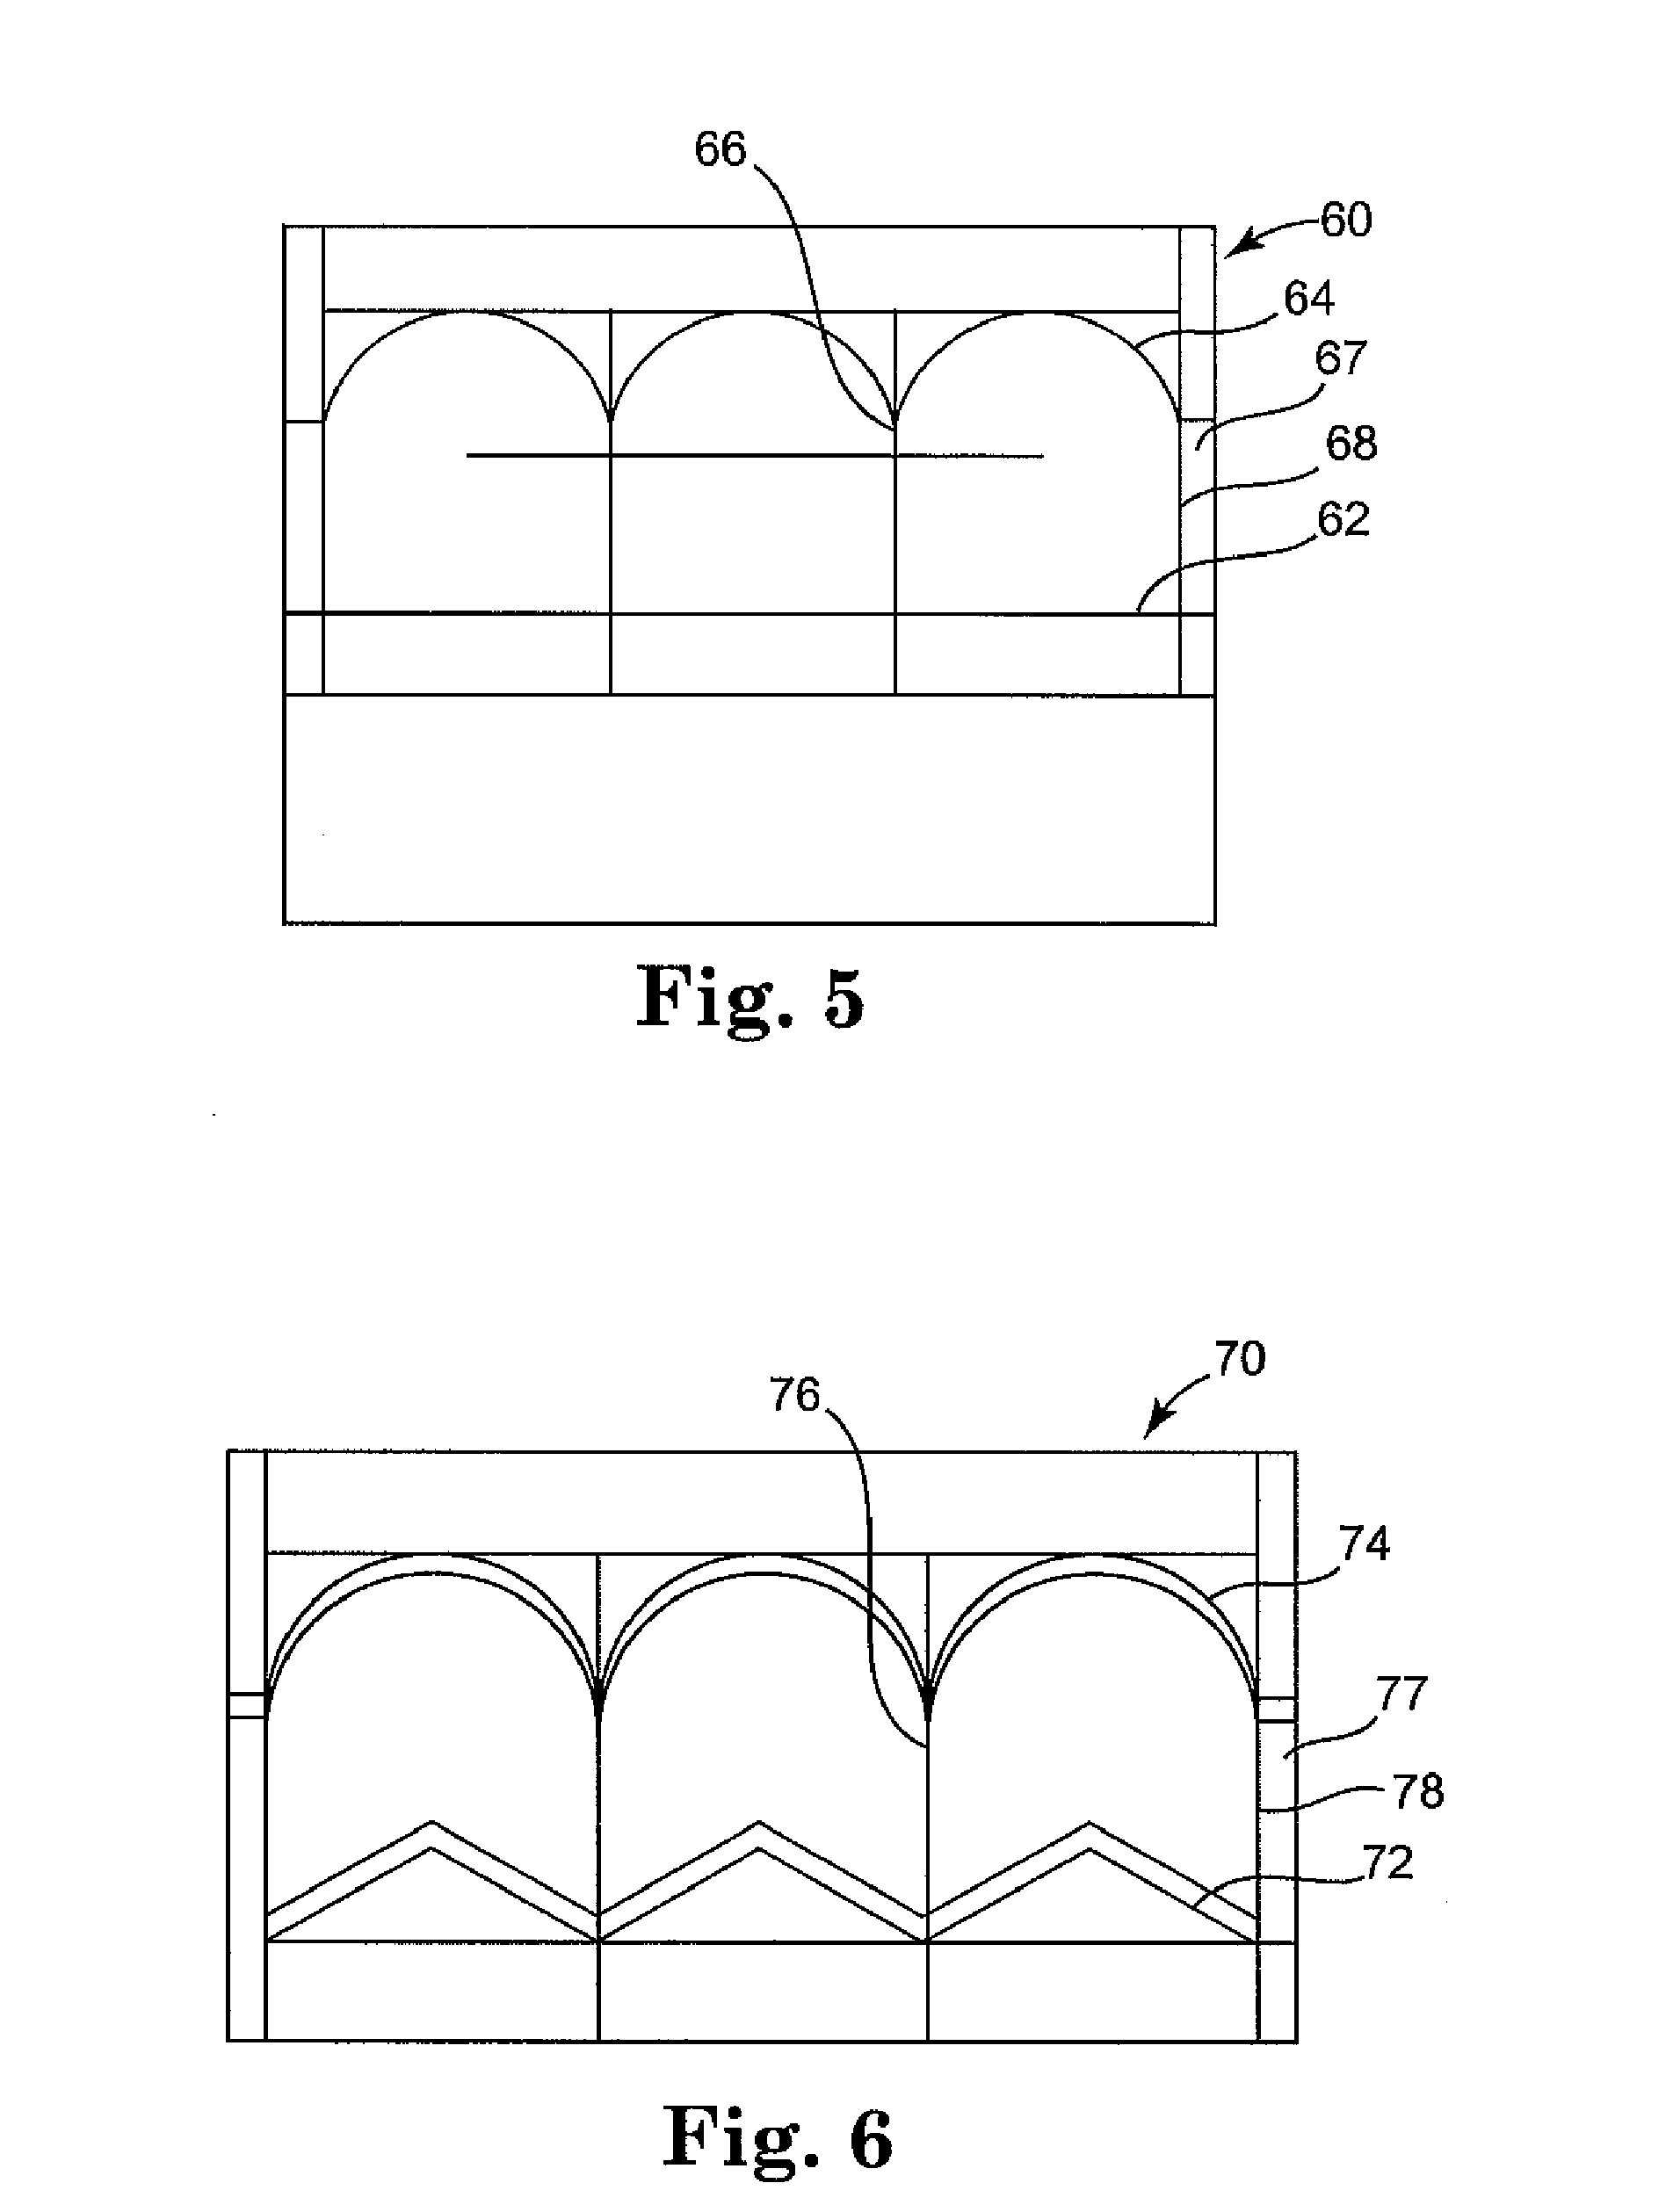 Prosthetic Cardiac Valve from Pericardium Material and Methods of Making Same